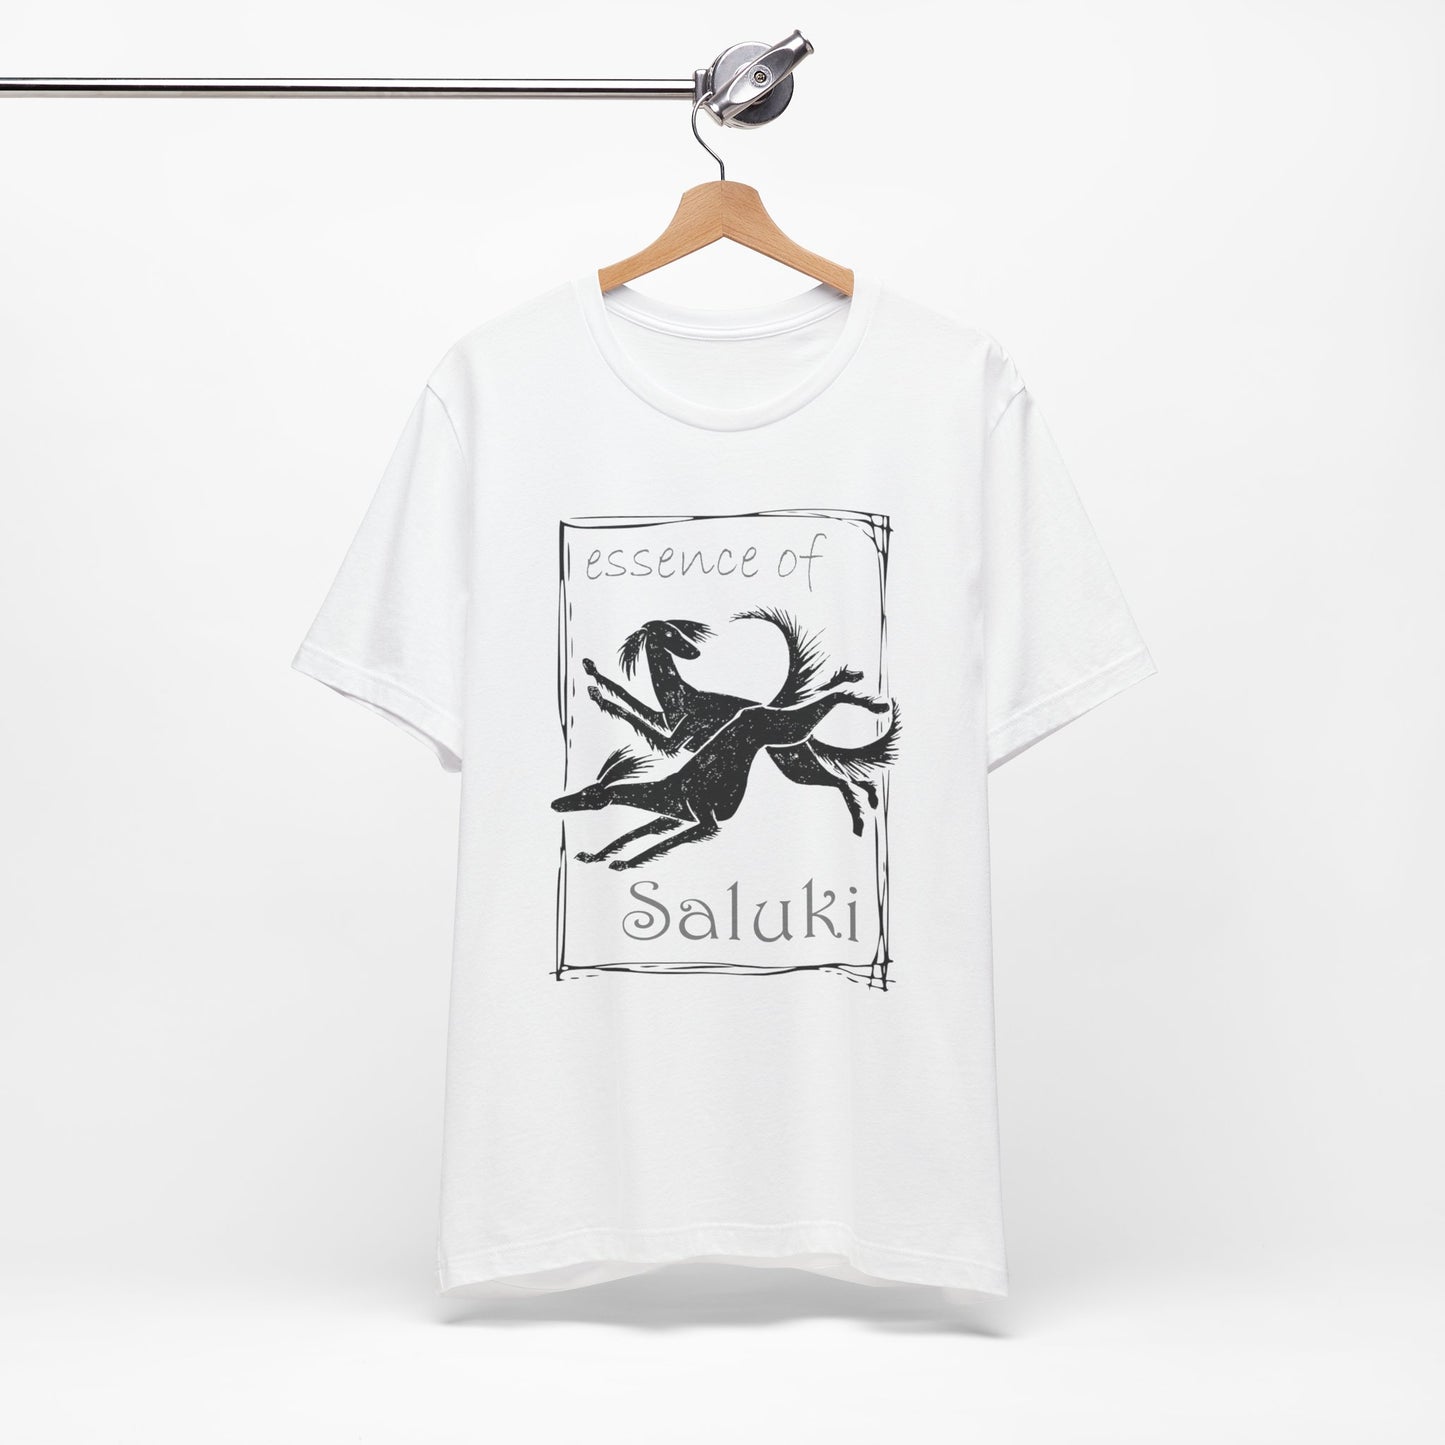 Unisex Jersey Short Sleeve Tee in white featuring the Saluki dog breed in full flight.